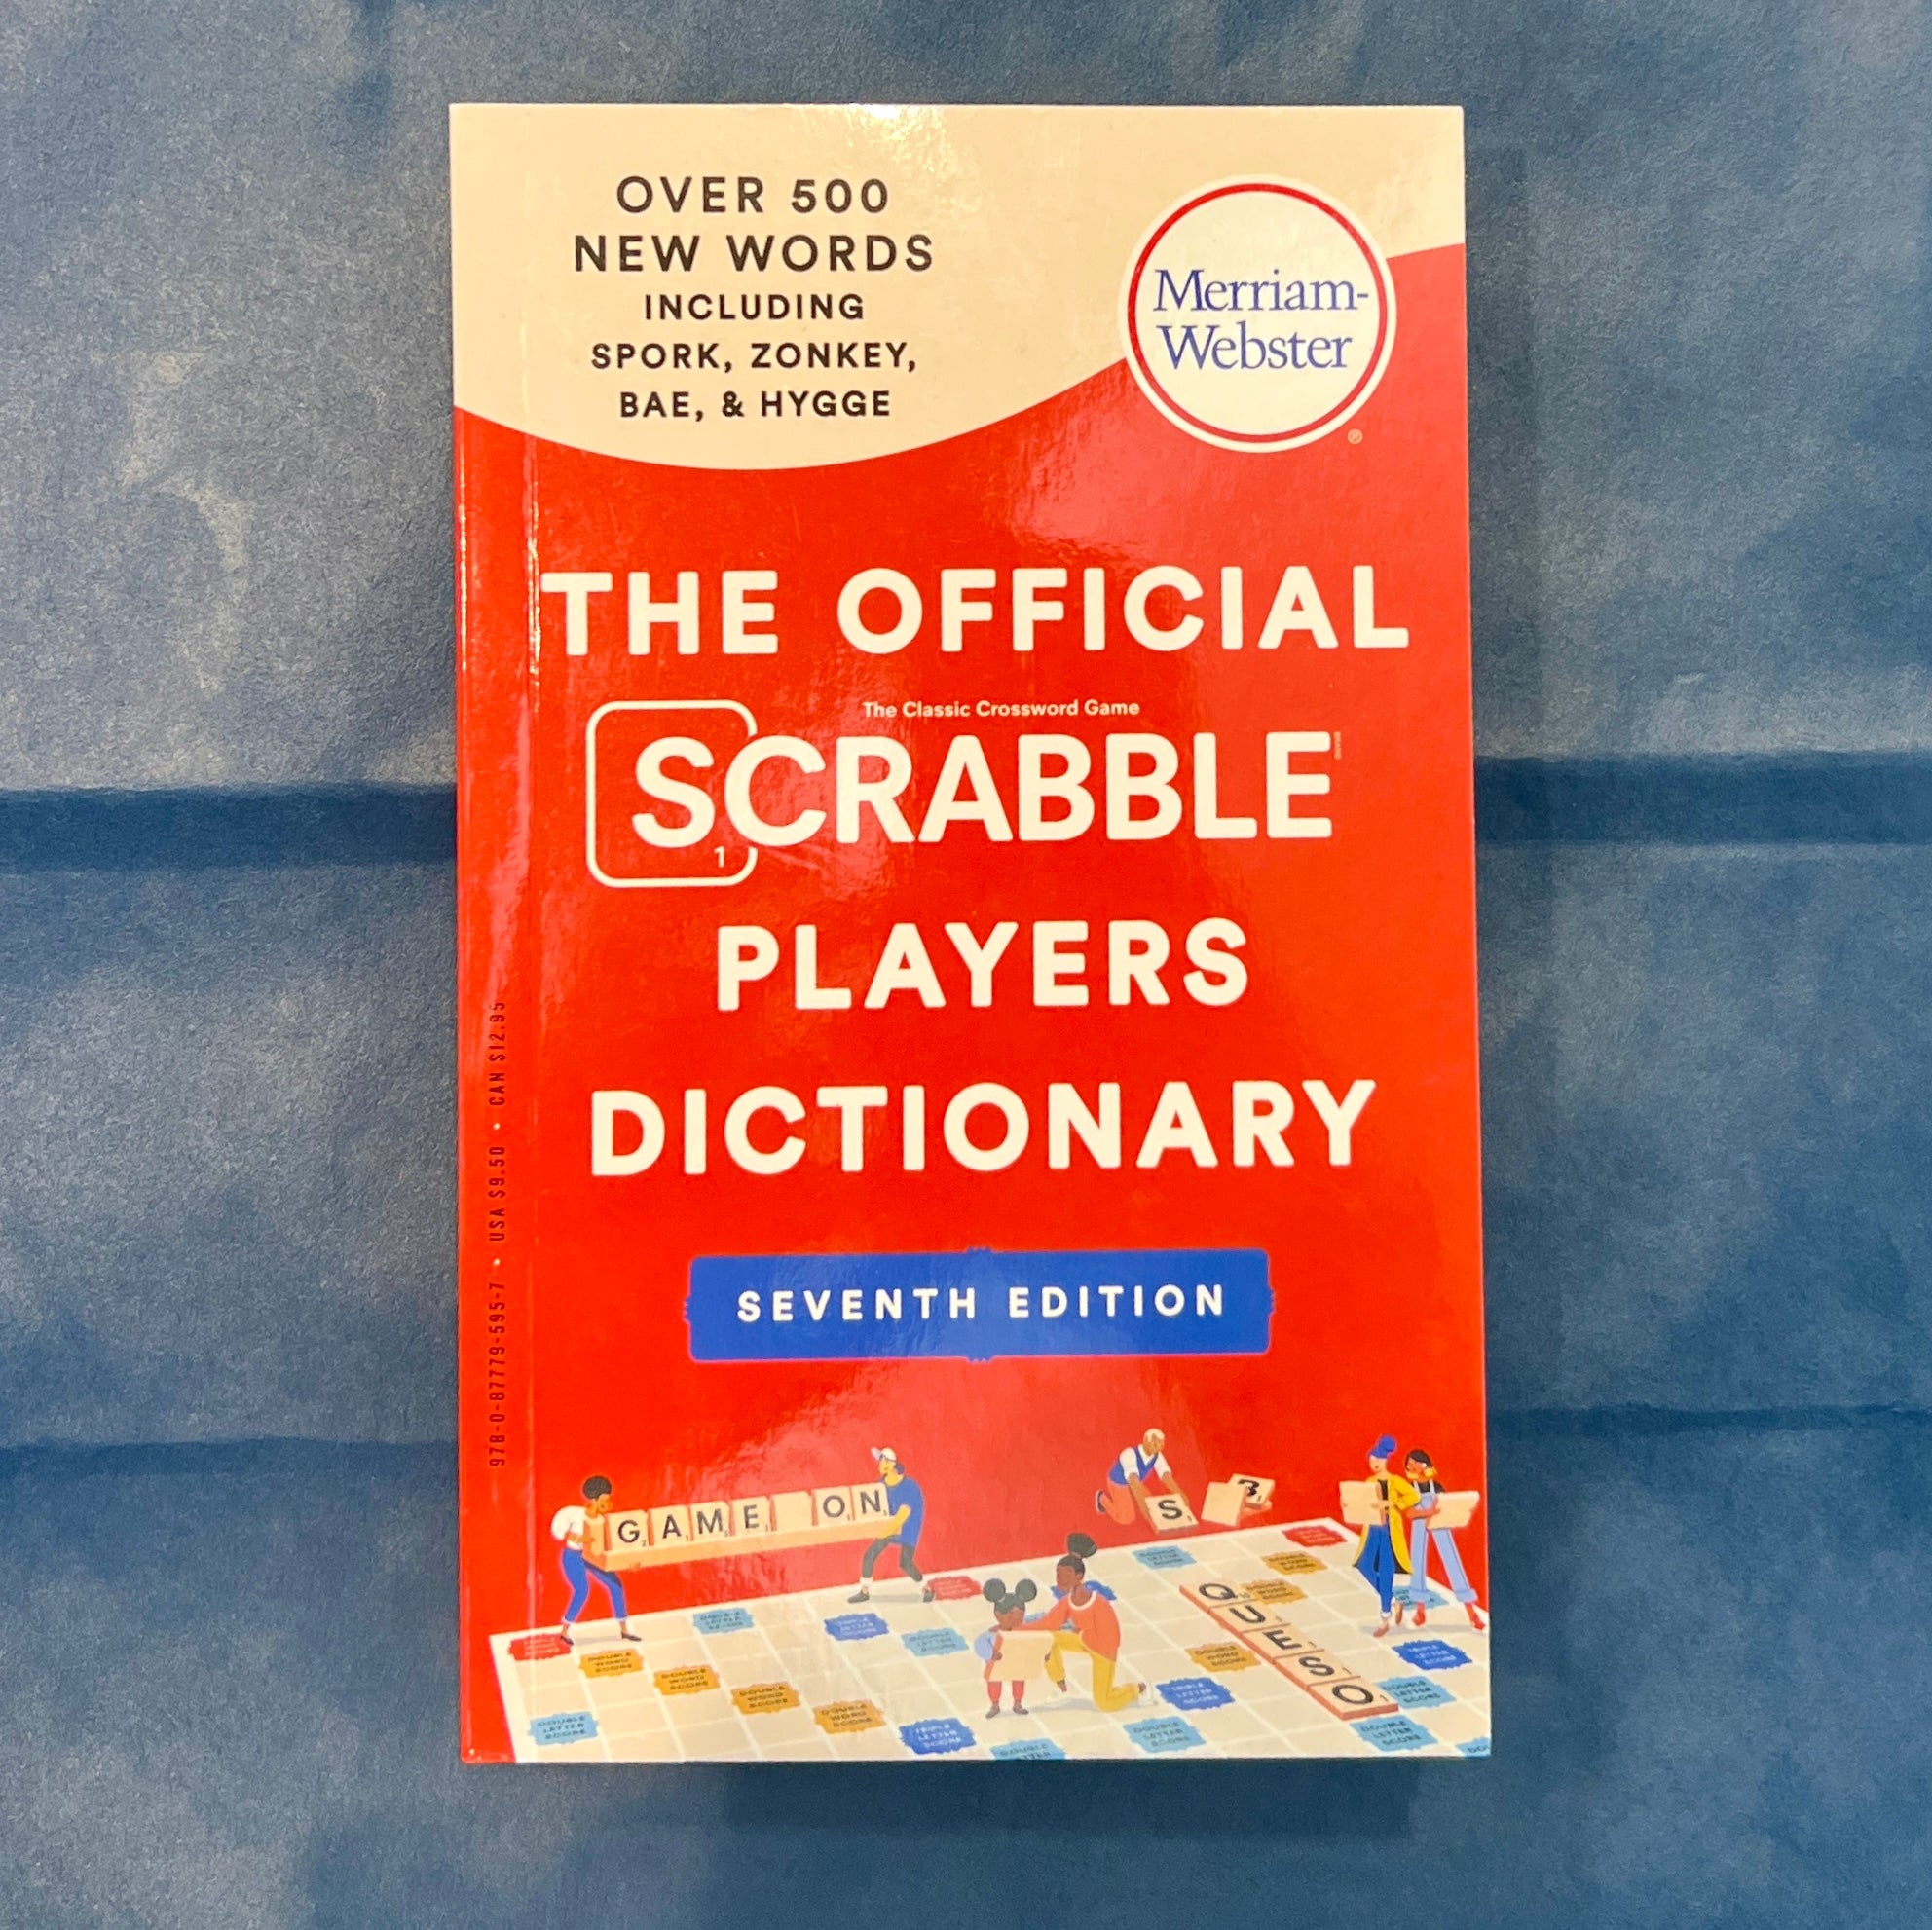 The Official Scrabble Players Dictionary – The West Hartford Gift Shop